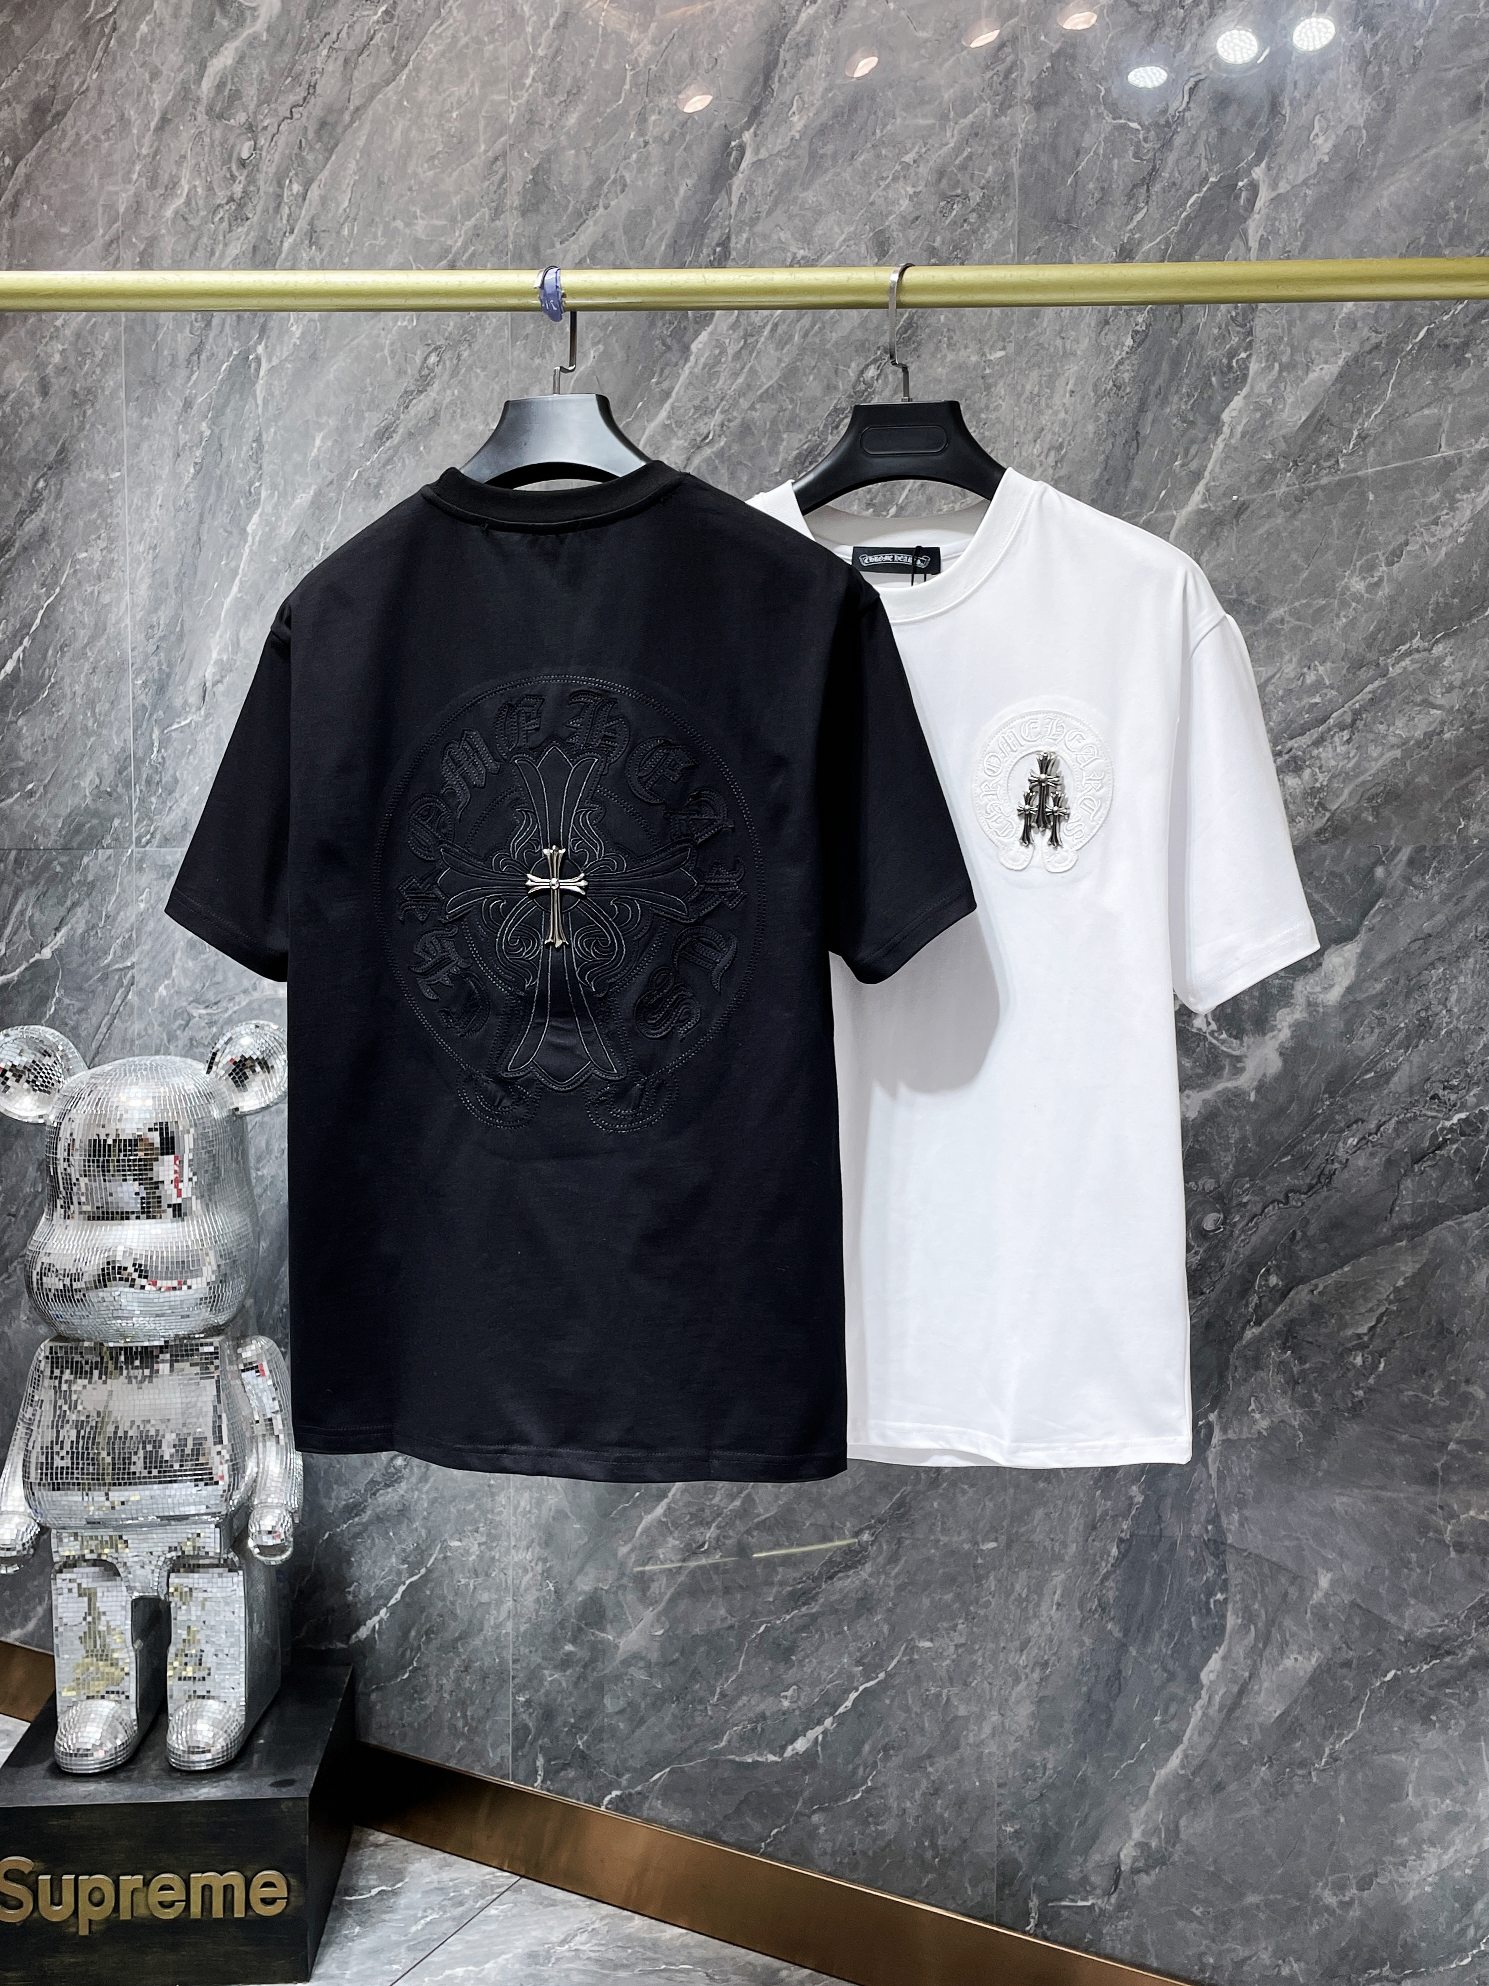 Fake Cheap best online
 Chrome Hearts Clothing T-Shirt Black White Embroidery Summer Collection Short Sleeve